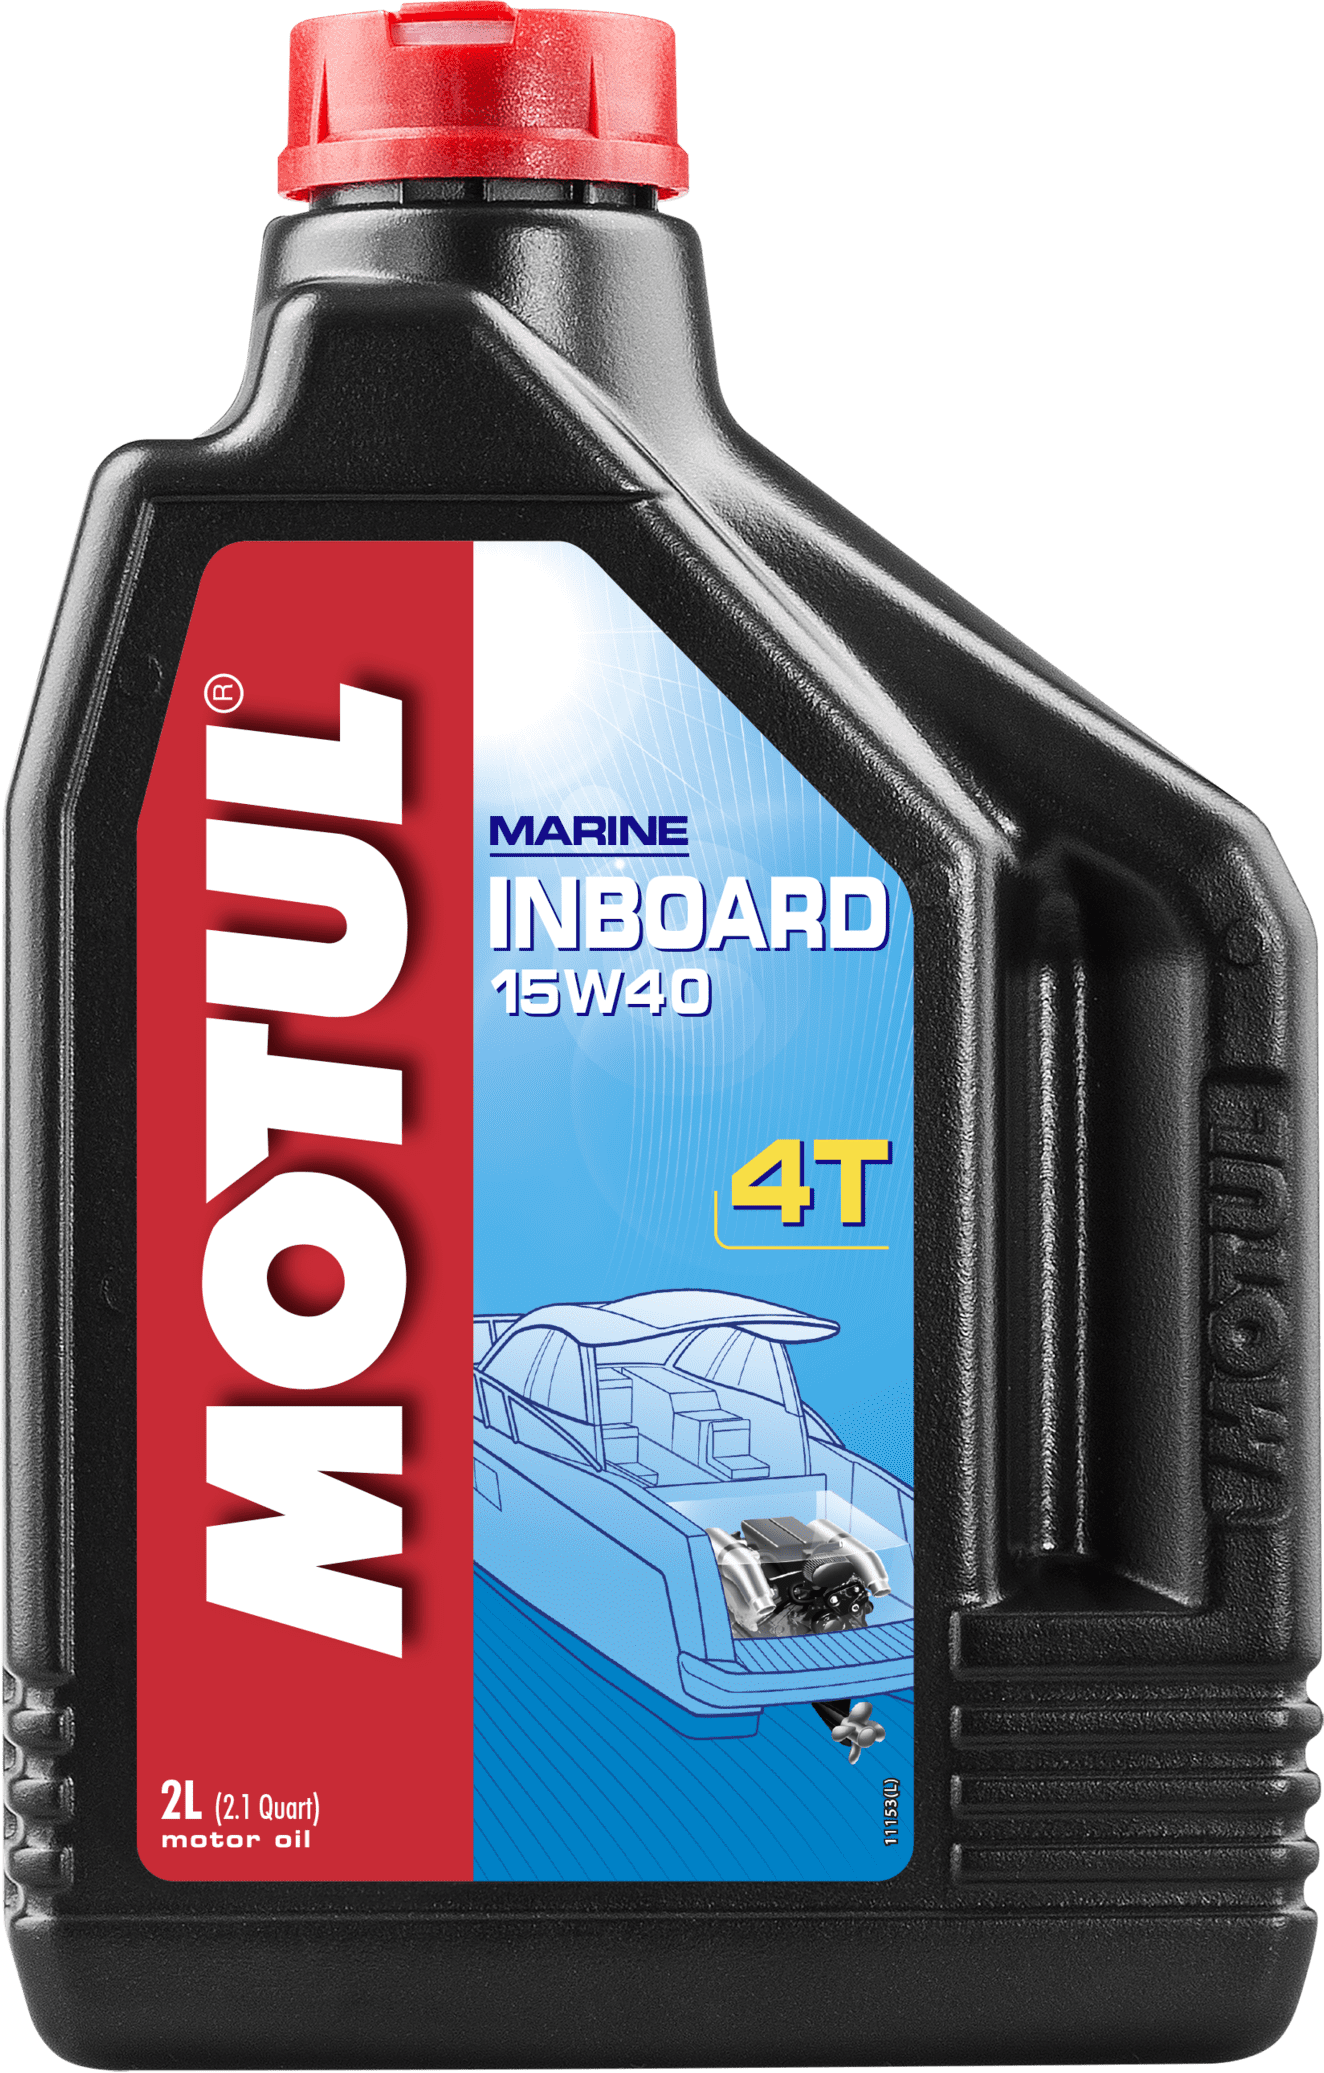 106363-2 Mineral lubricant for 4-Stroke marine engines.